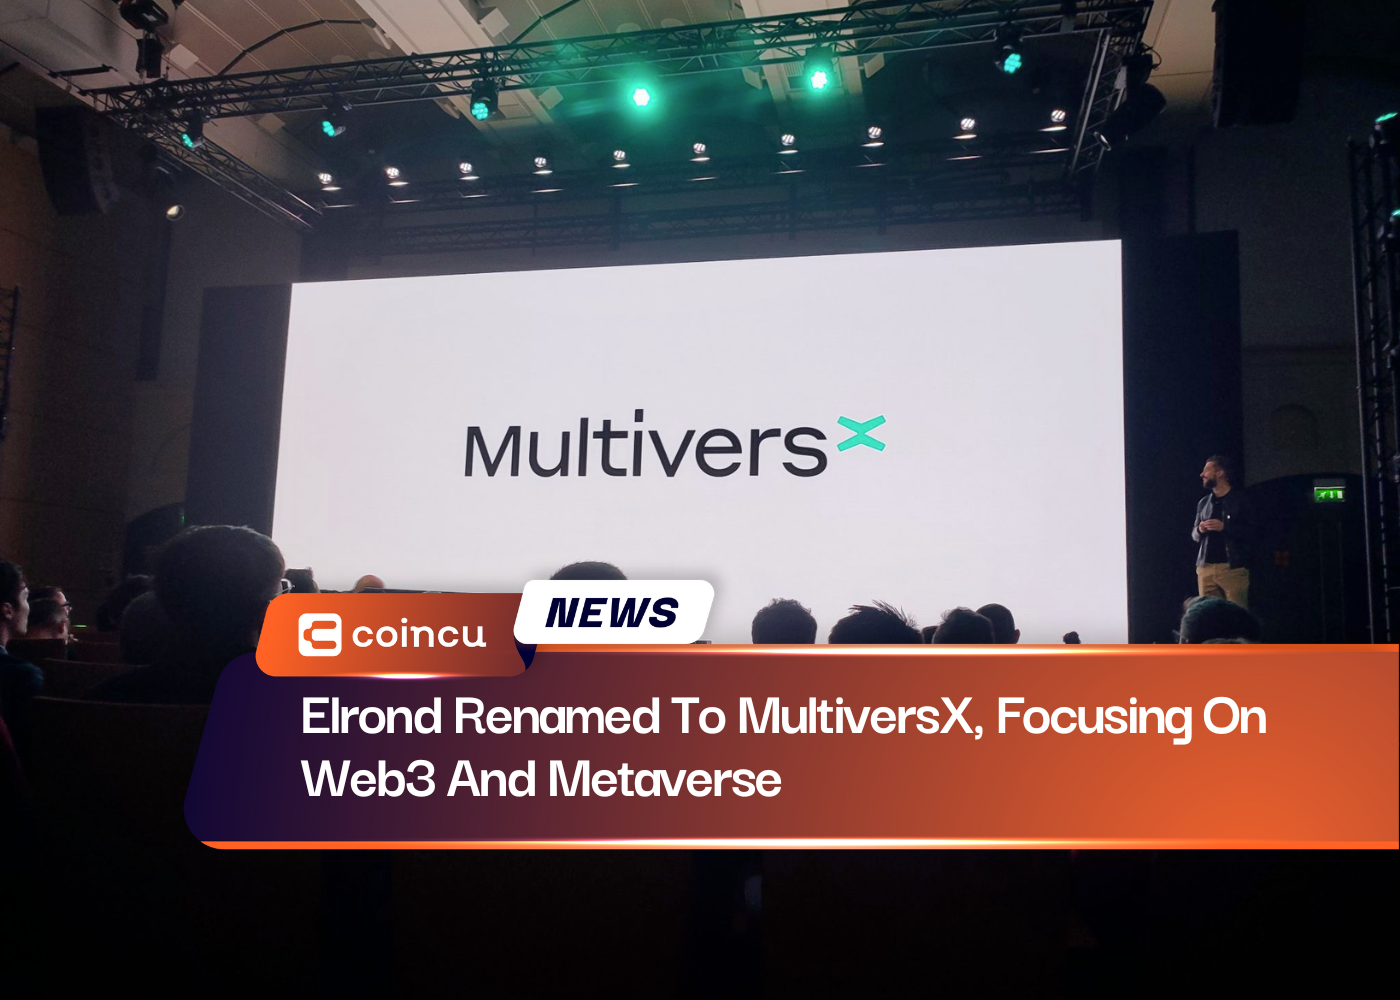 Elrond Renamed To MultiversX, Focusing On Web3 And Metaverse